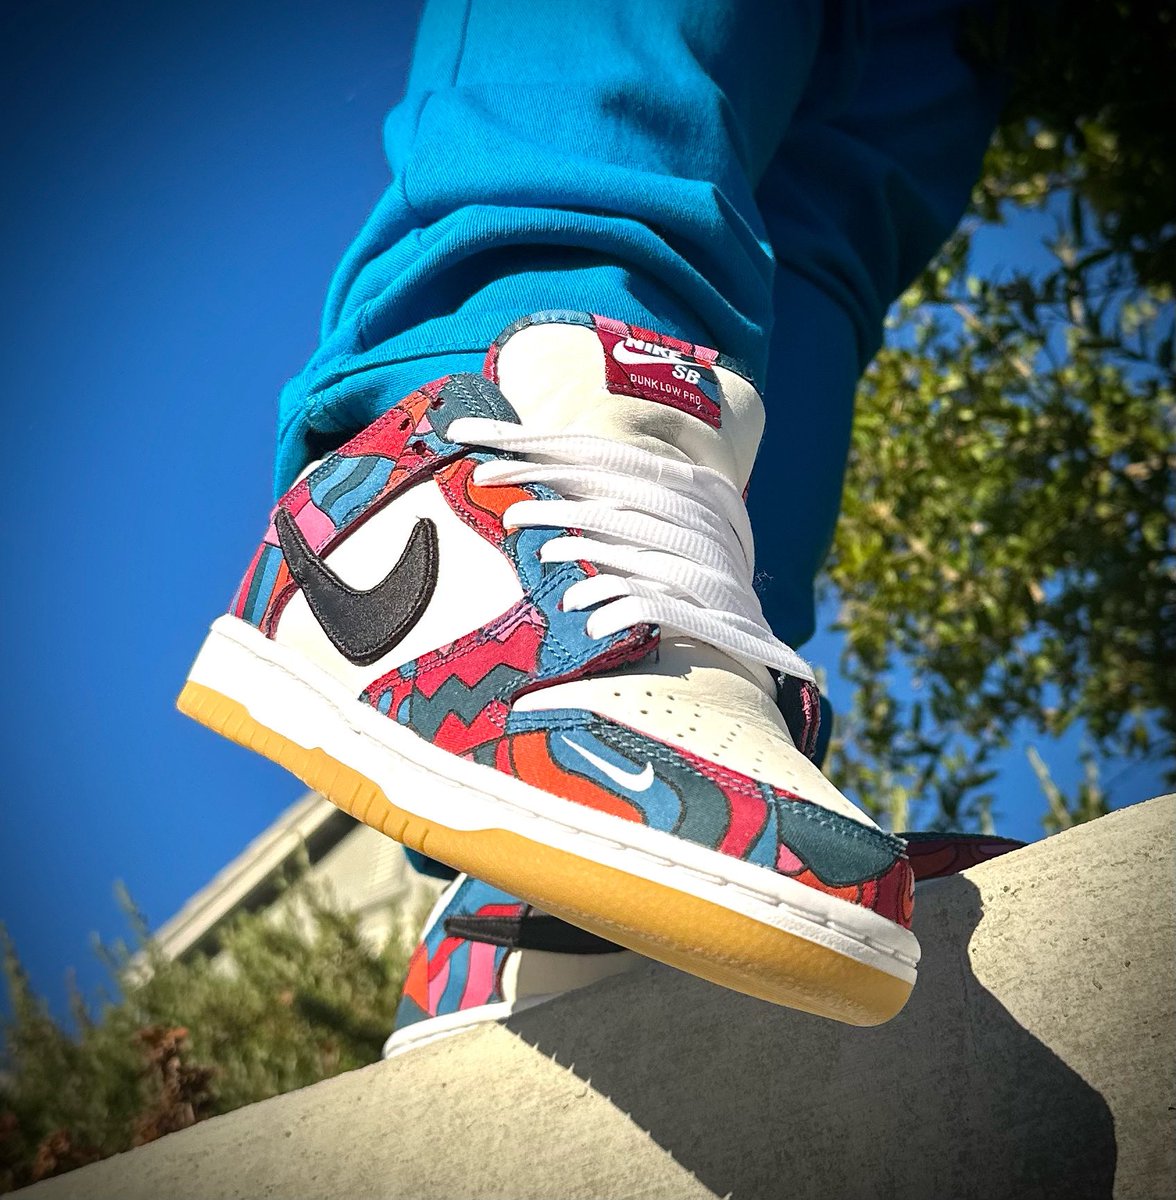 Day 14 of the #dunksondeck challenge still going strong decided to to wear my Parra dunk thanks again @copdate for these.. #nike #sneakerfreaker #kotd 
 #nike #kicks #kickstagram #dailysole #snkrsliveheatingup #Irkicksondeck #thesneakerluminati #kicksonfire #jumpmanjournals